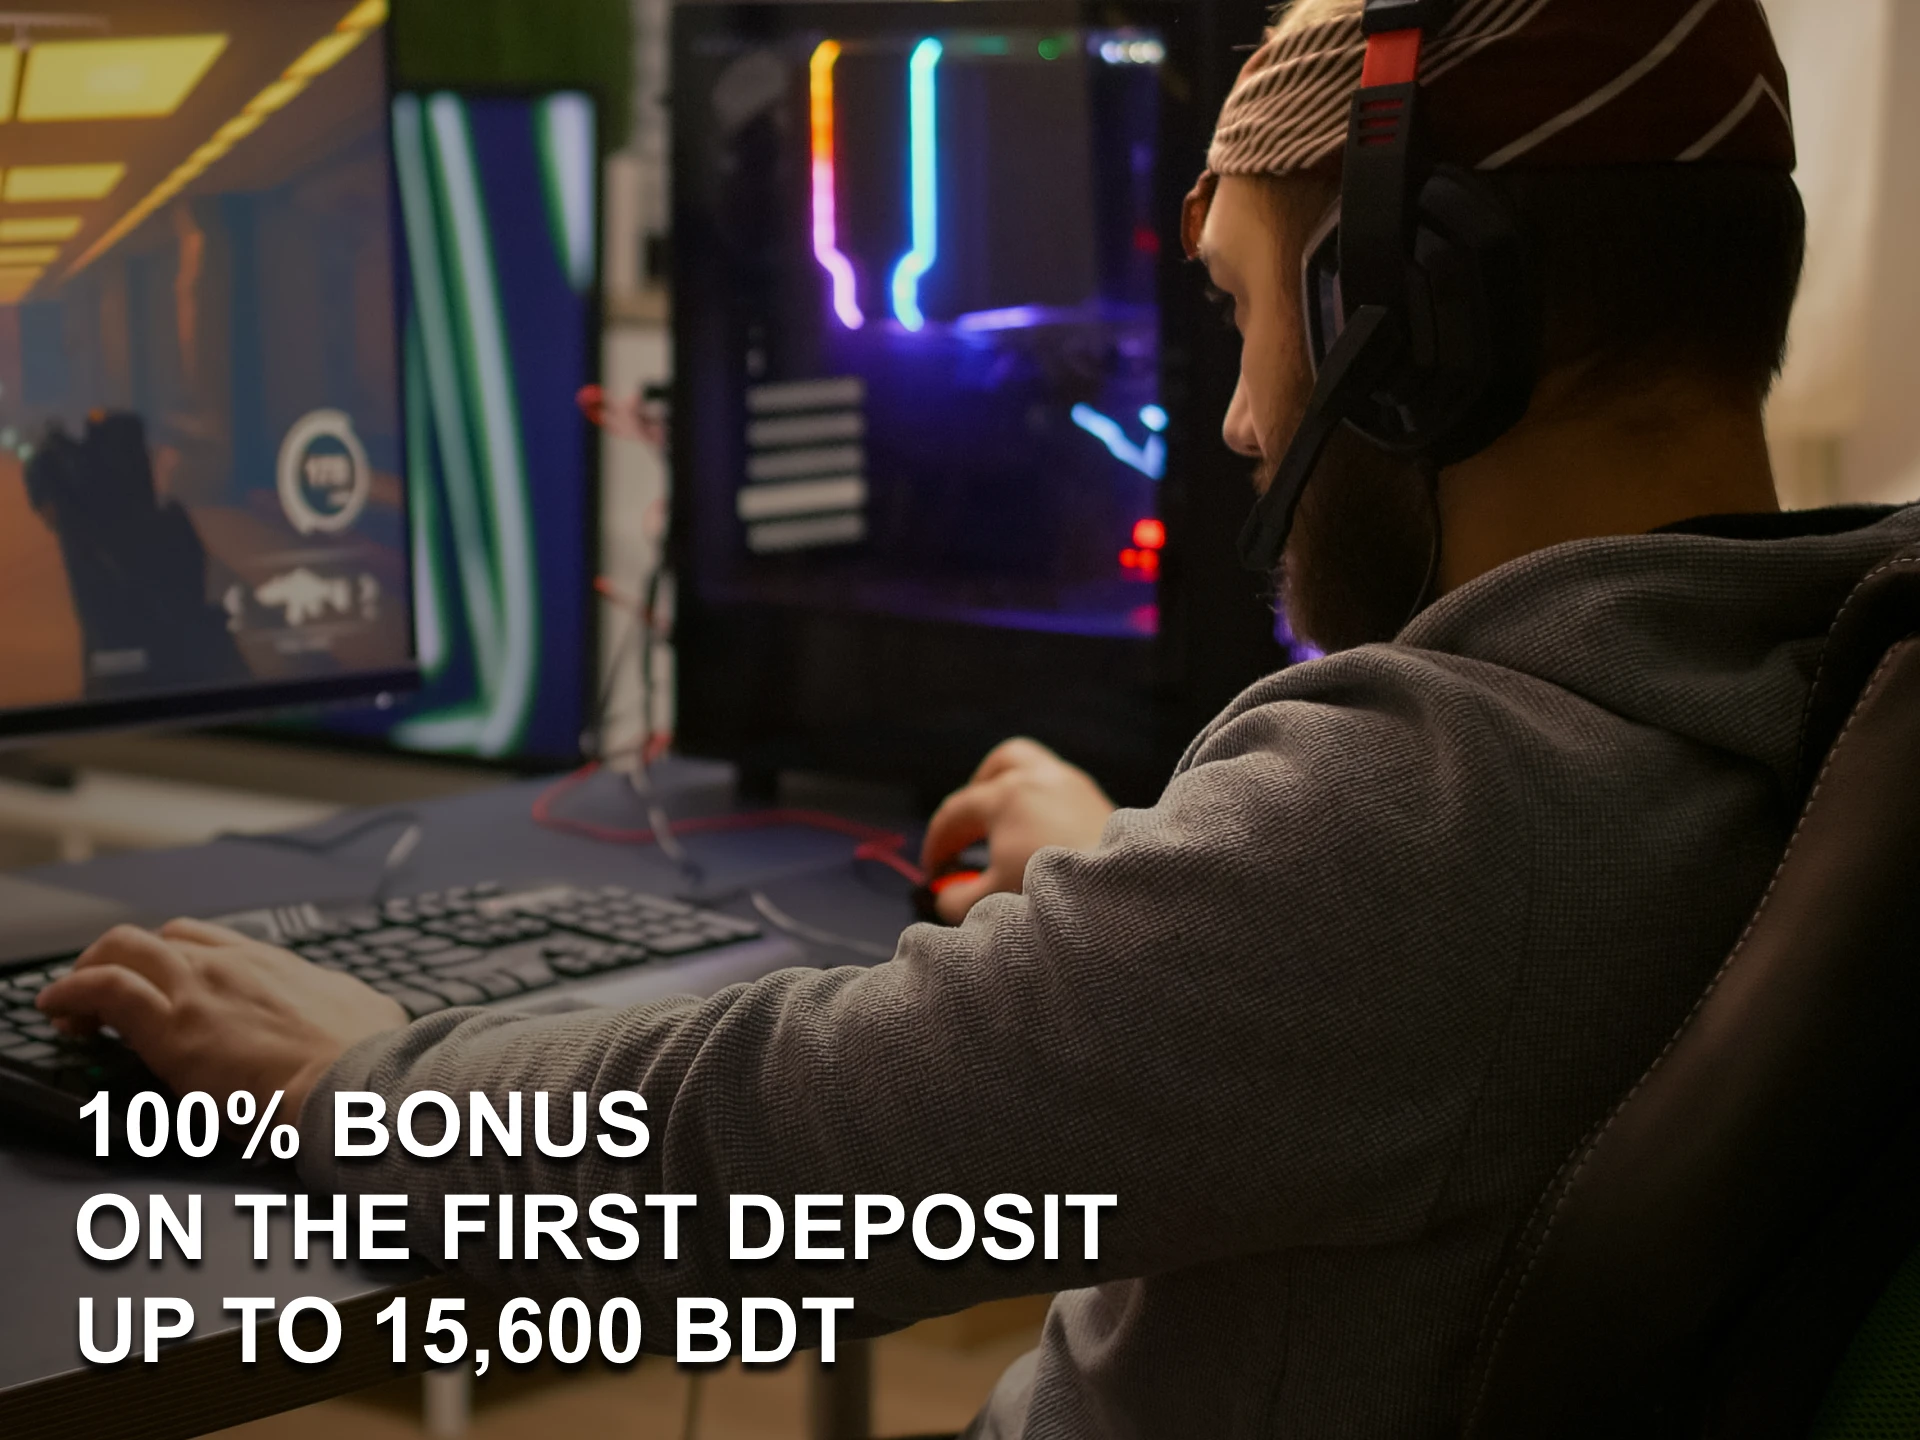 If you are a new user, get the bonus after the first deposit.